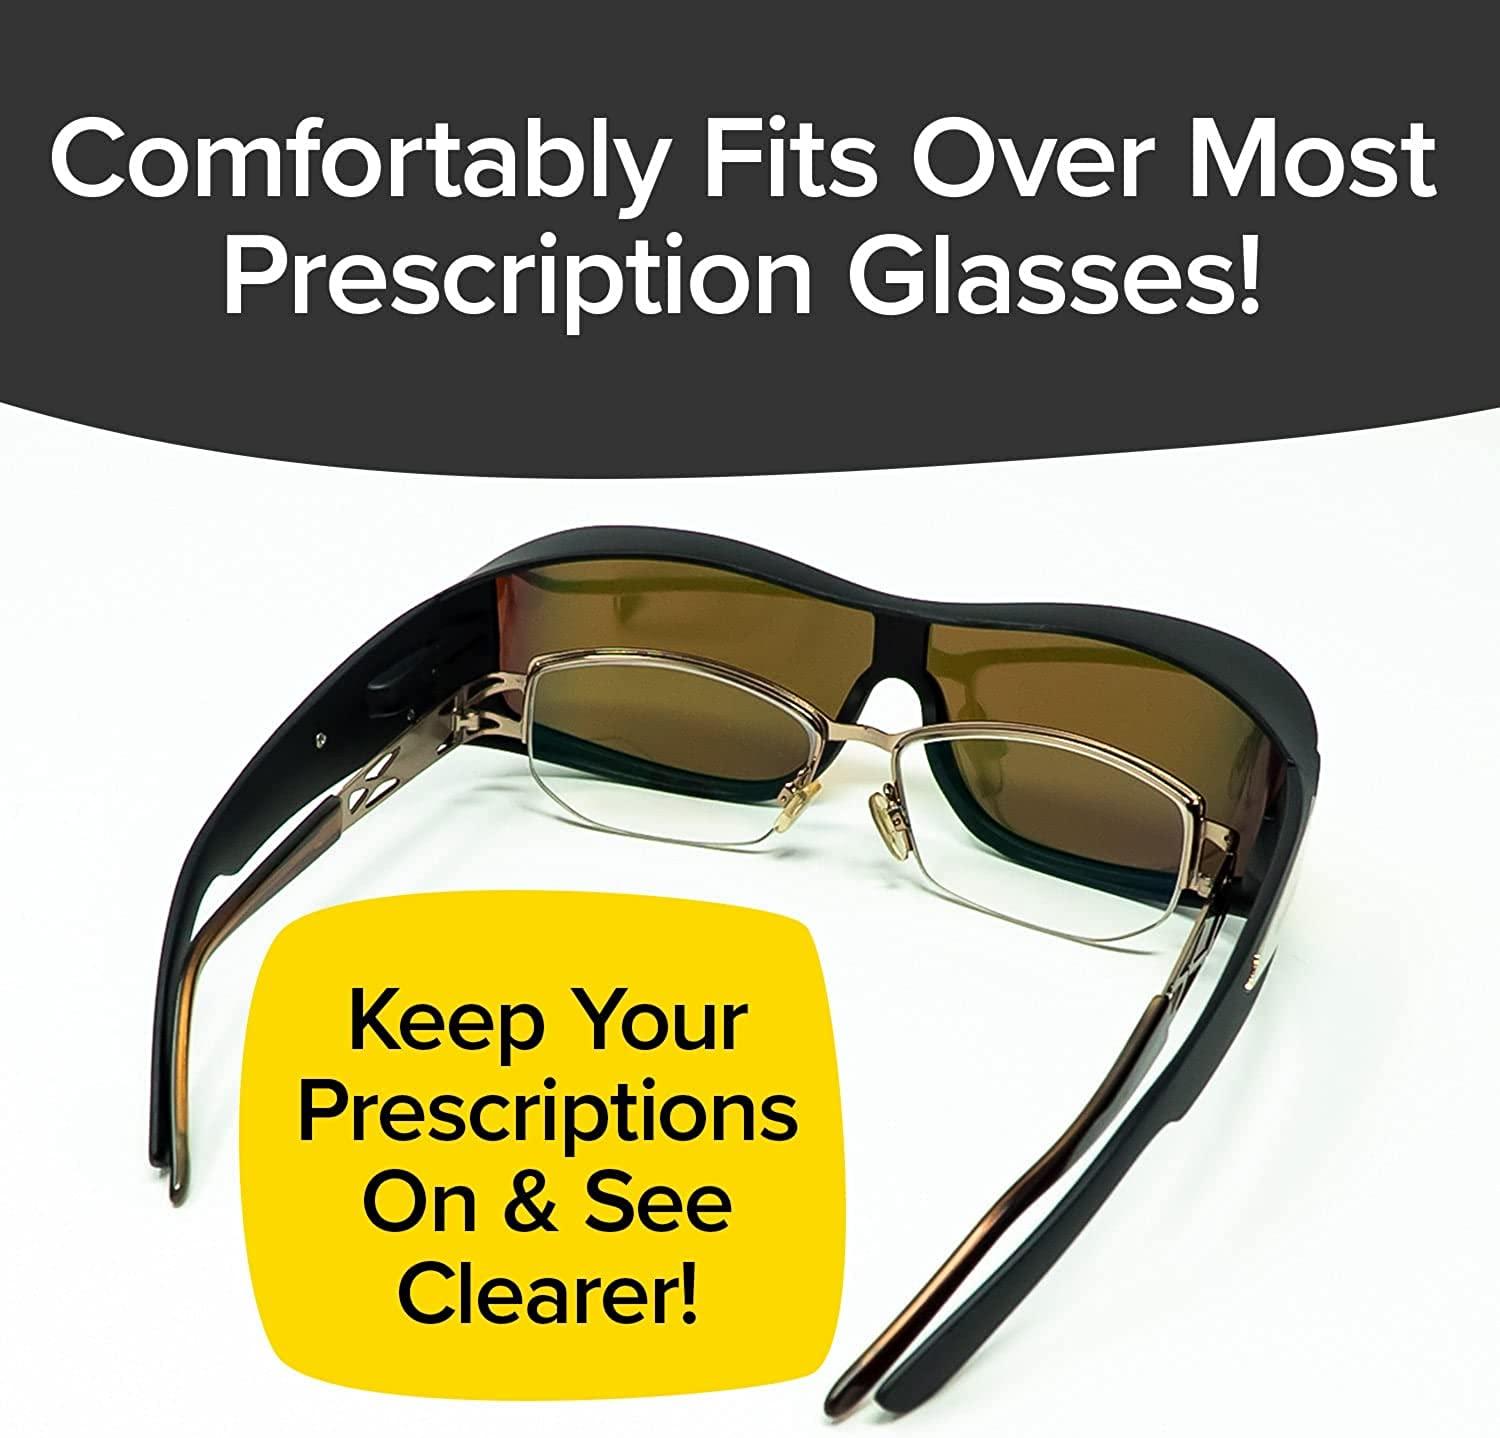 Prescription Sunglass - Protect Your Eyes from Harmful UV Rays